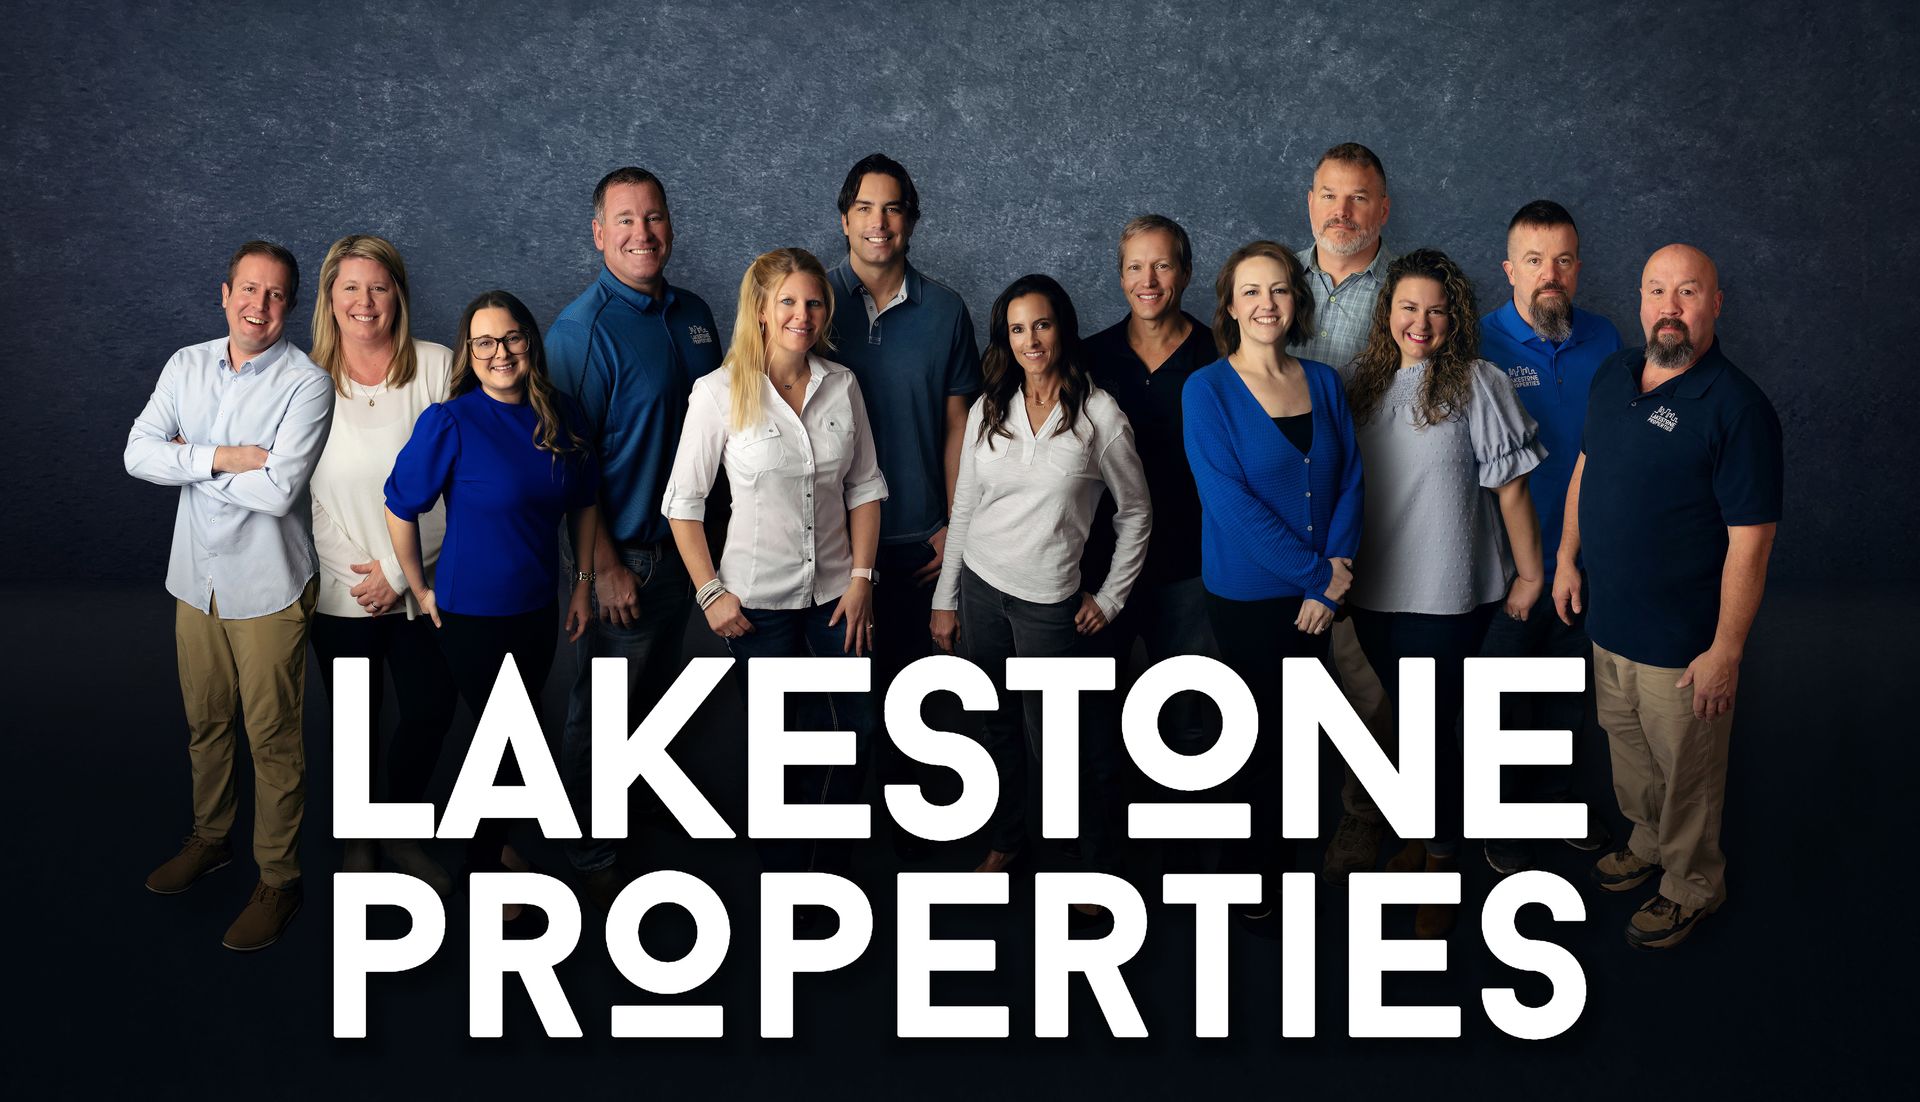 group photo of the team at lakestone properties